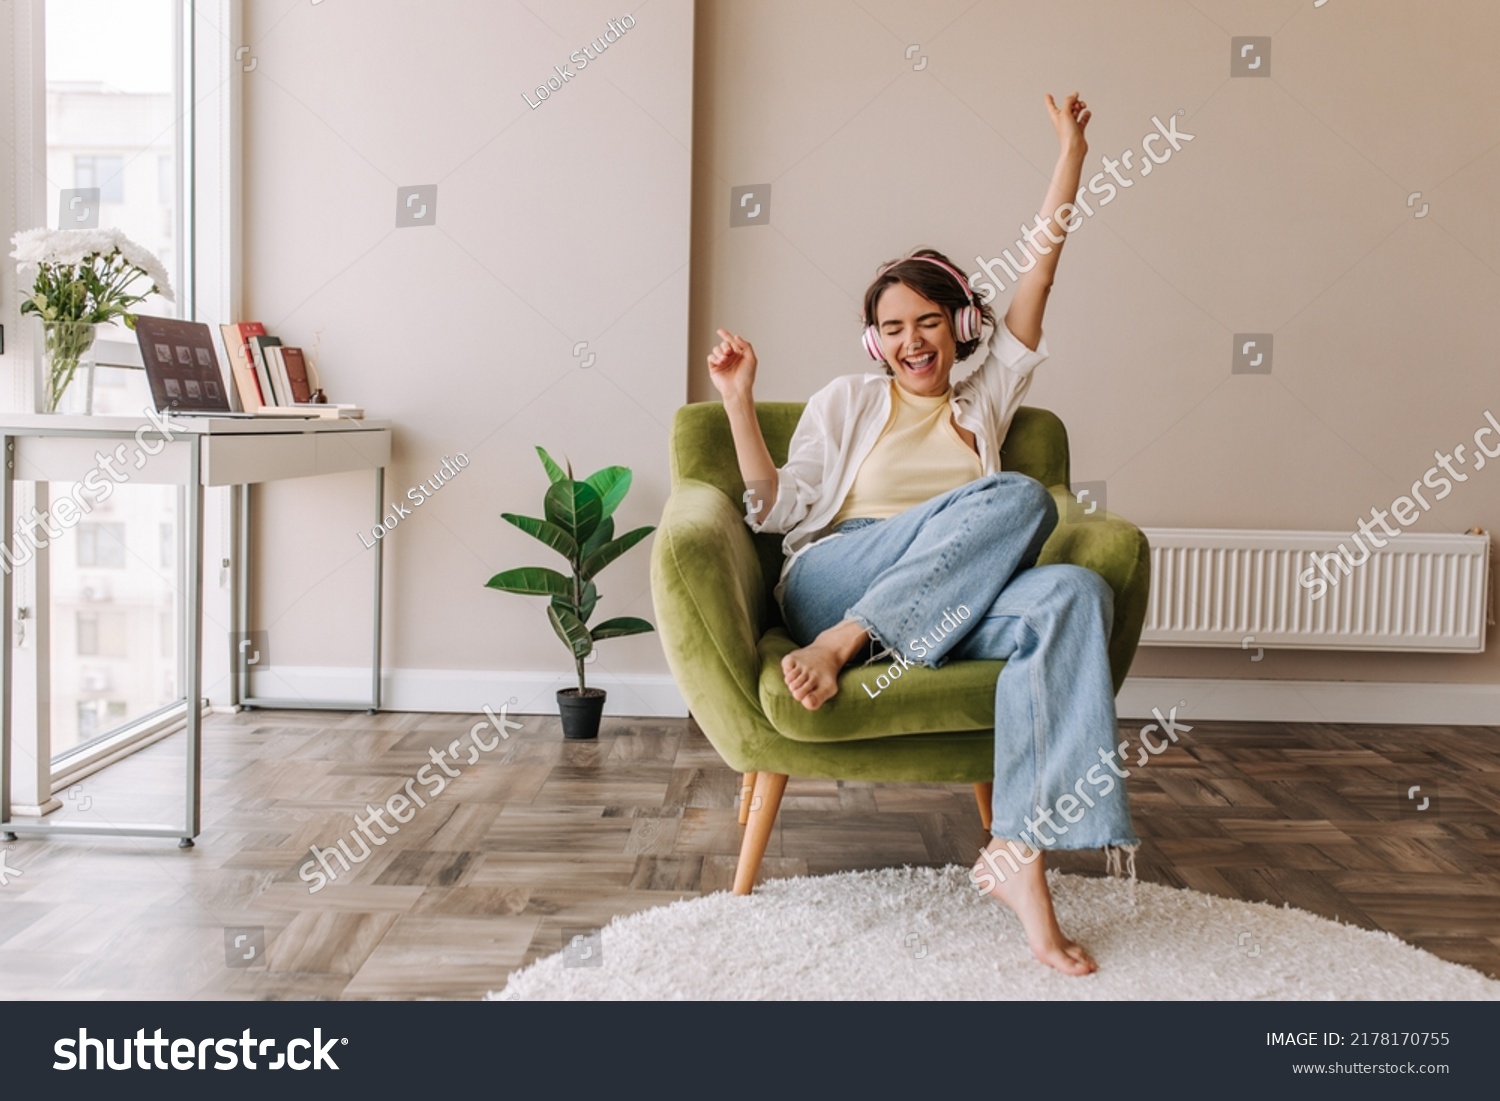 Young pretty woman listening music in headphones . Full view of funny caucasian woman having fun at home sitting on green chair. Concept of use technology  #2178170755